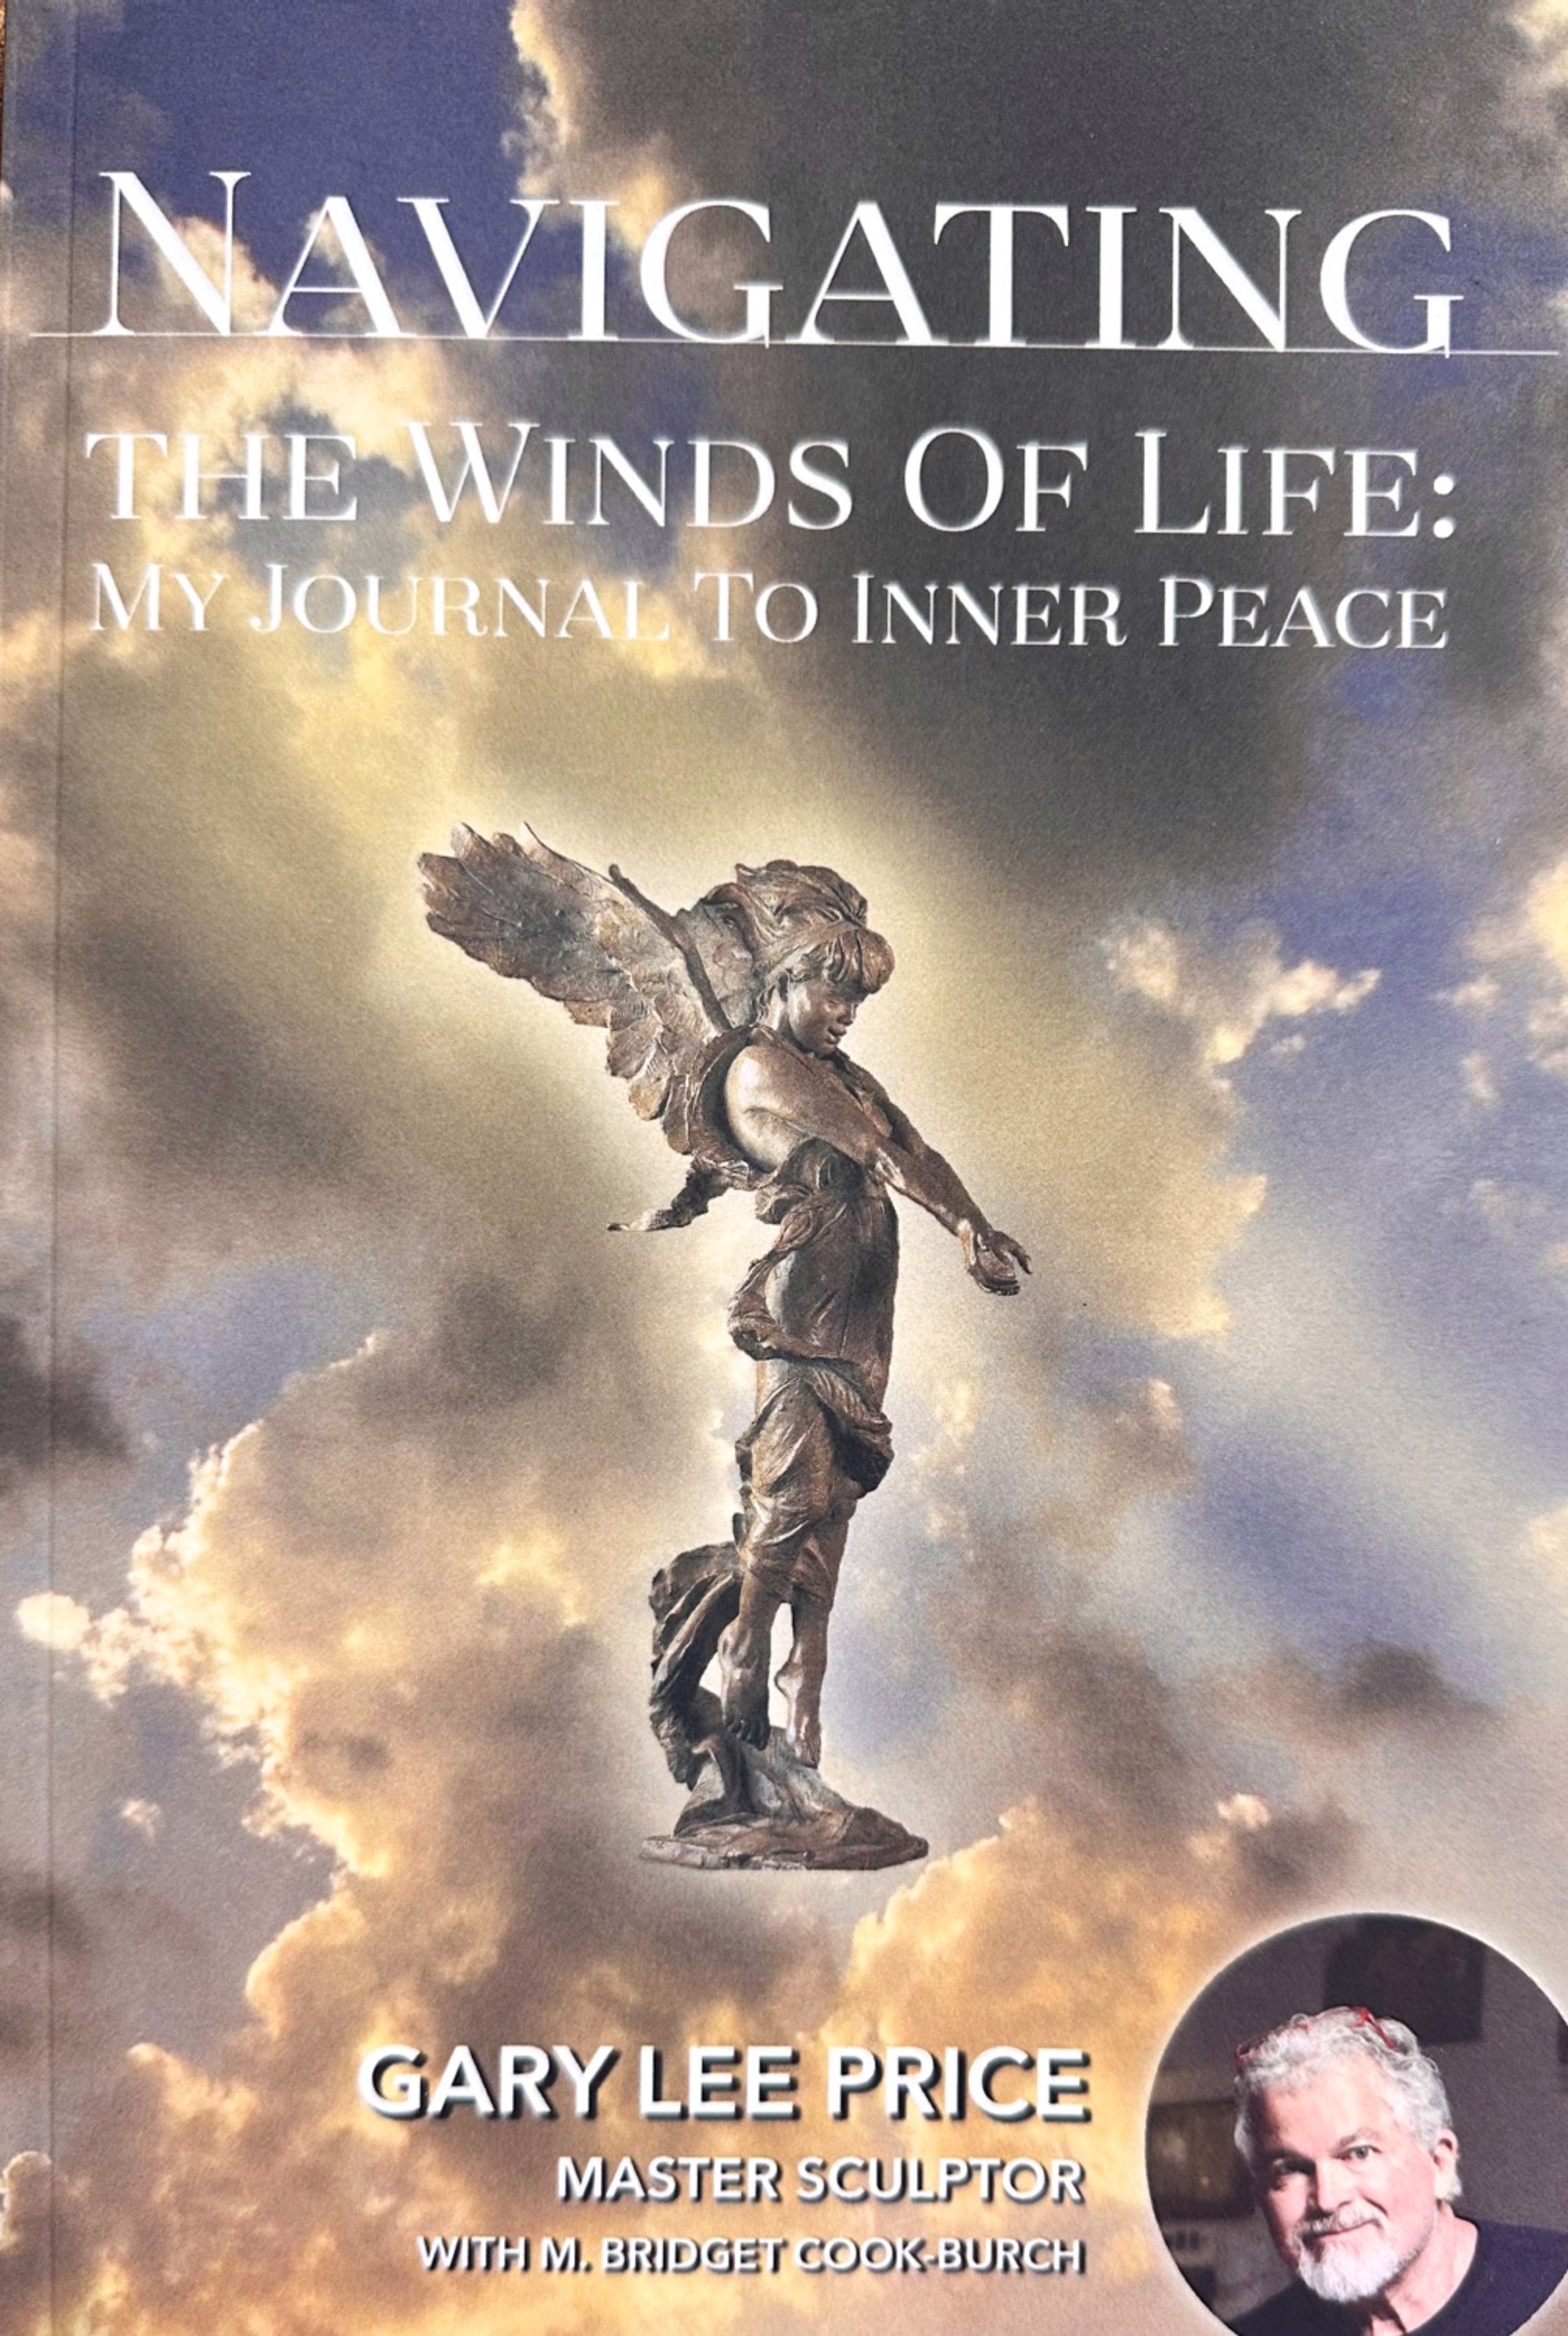 "Navigating the Winds of Life: My Journal to Inner Peace" Soft Cover Book by Gary Lee Price